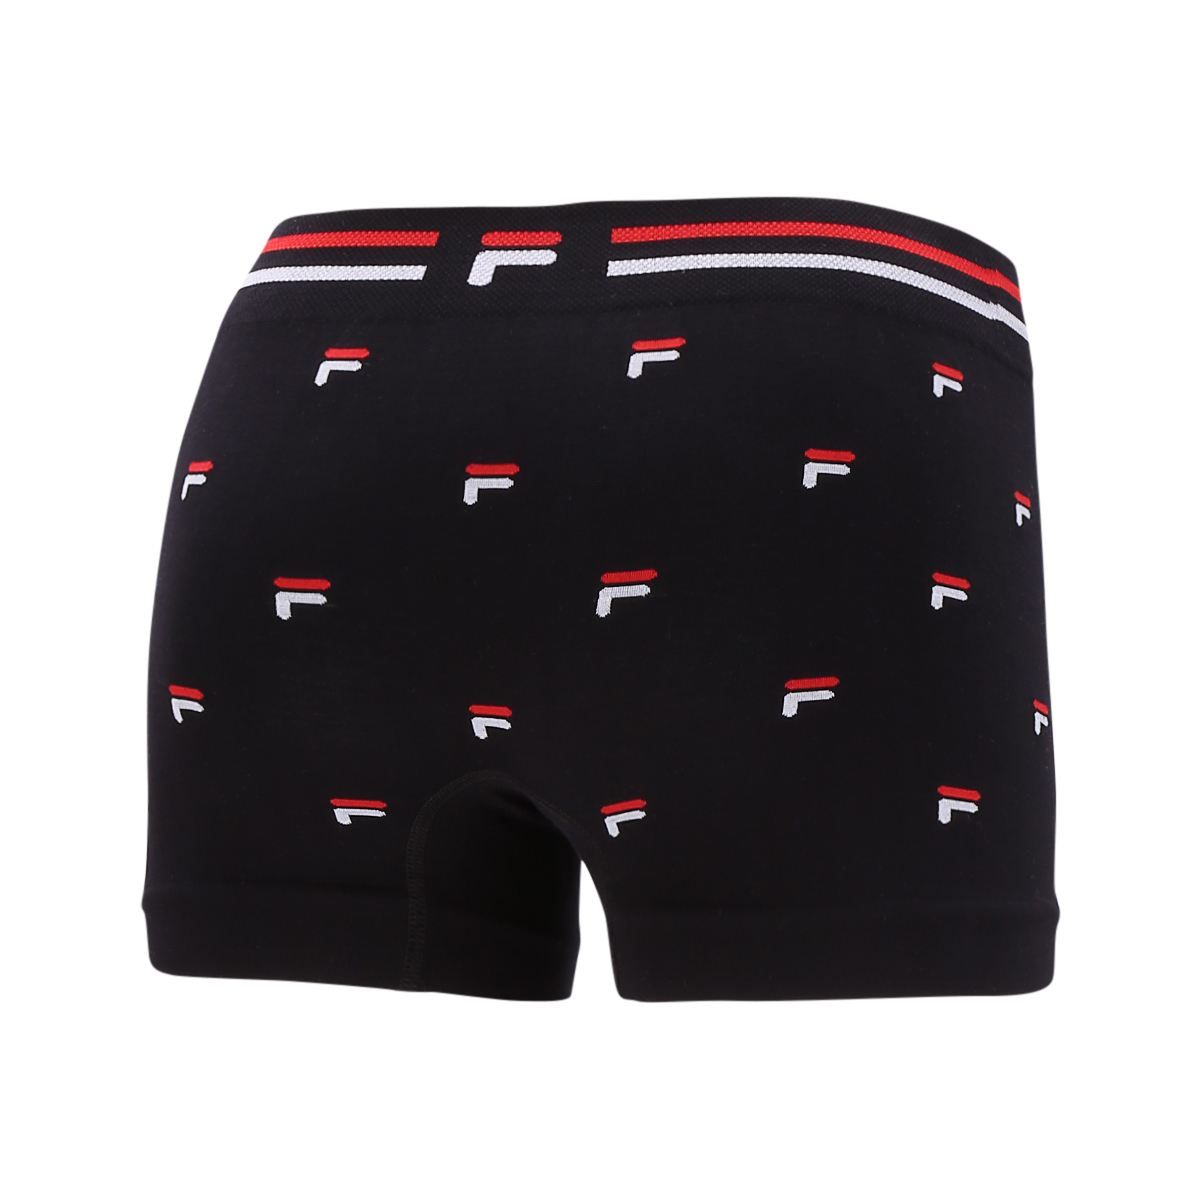 Boxer Fila F Flowting,  image number null